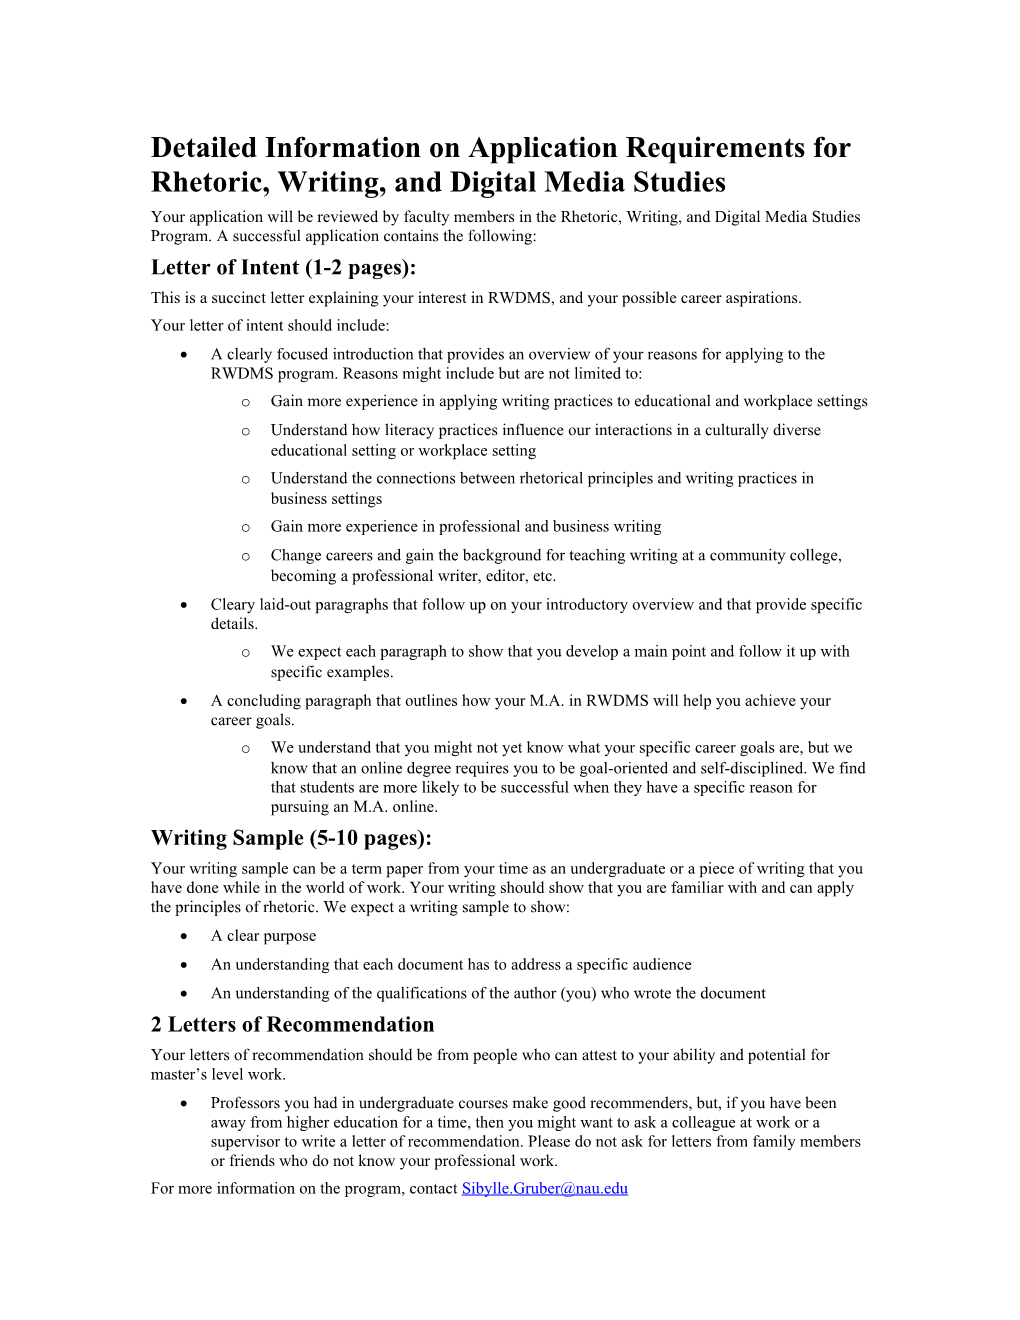 Detailed Information on Application Requirements for Rhetoric, Writing, and Digital Media